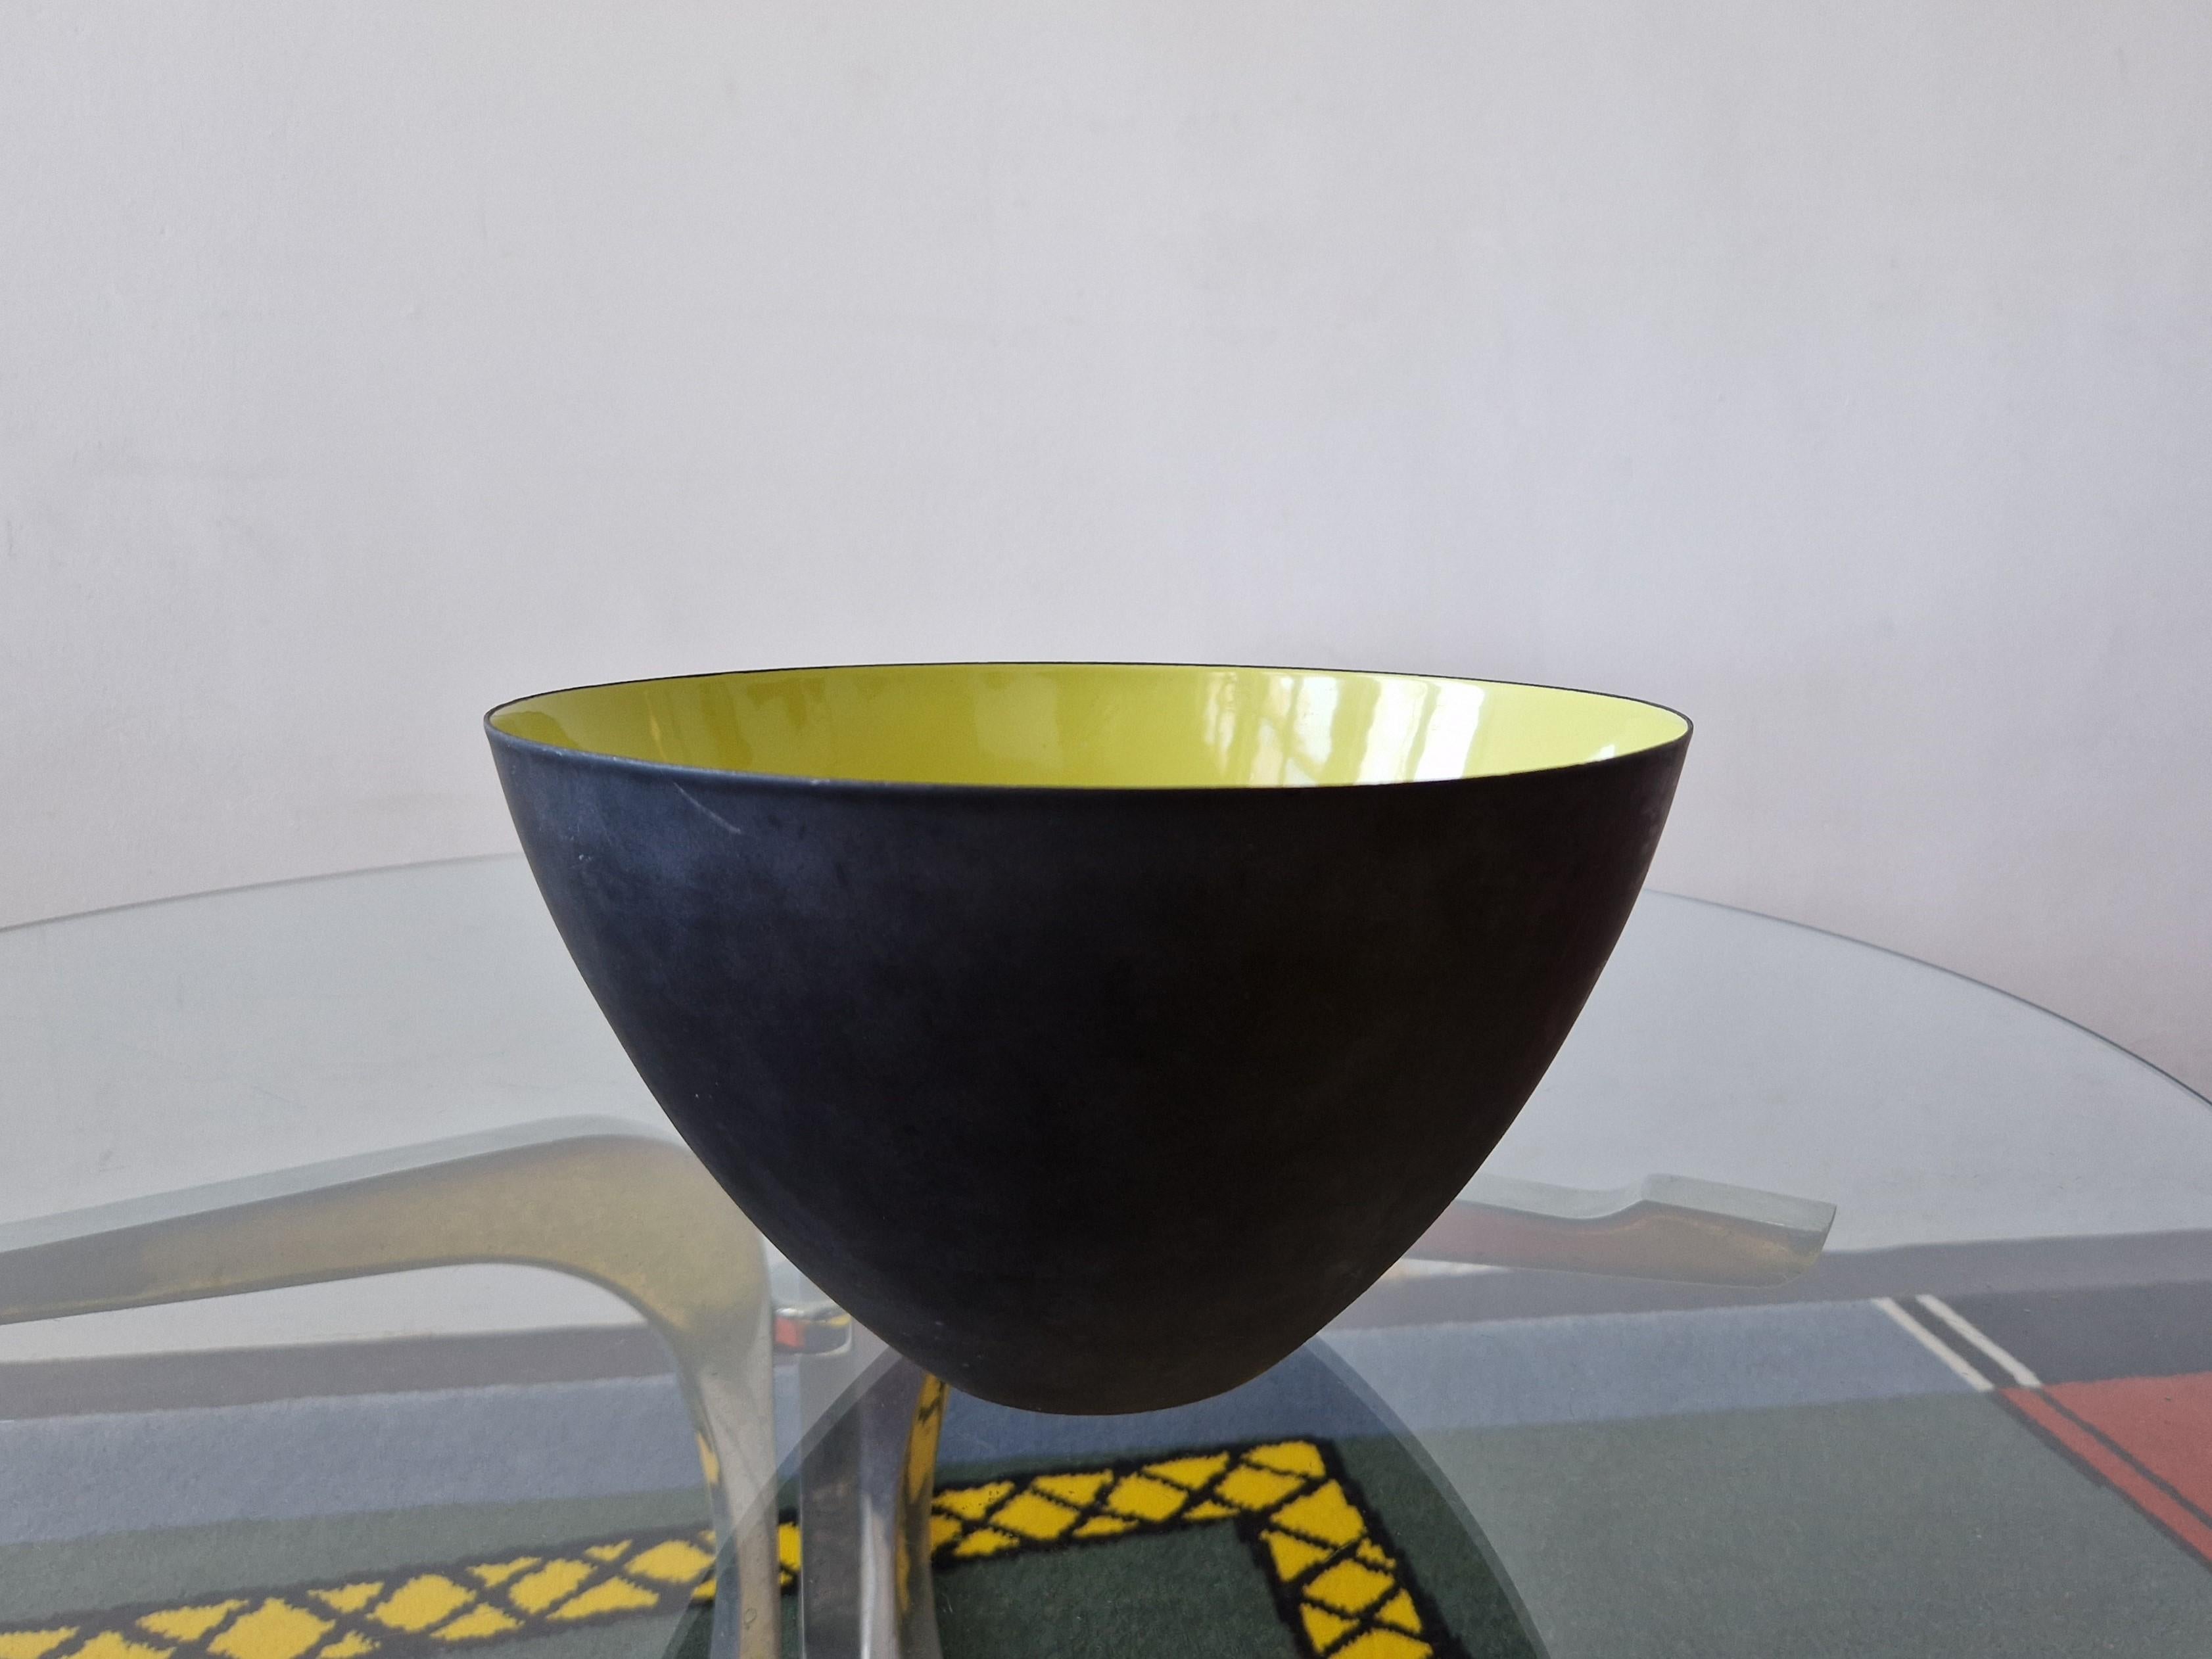 This 'Krenit' bowl was designed by mechanical engineer Herbert Krenchel and his good friend Torben Ørskov who put them in production in 1953. They had realised that Americans ate a lot of salad, so they wanted to make a series of bowls for that